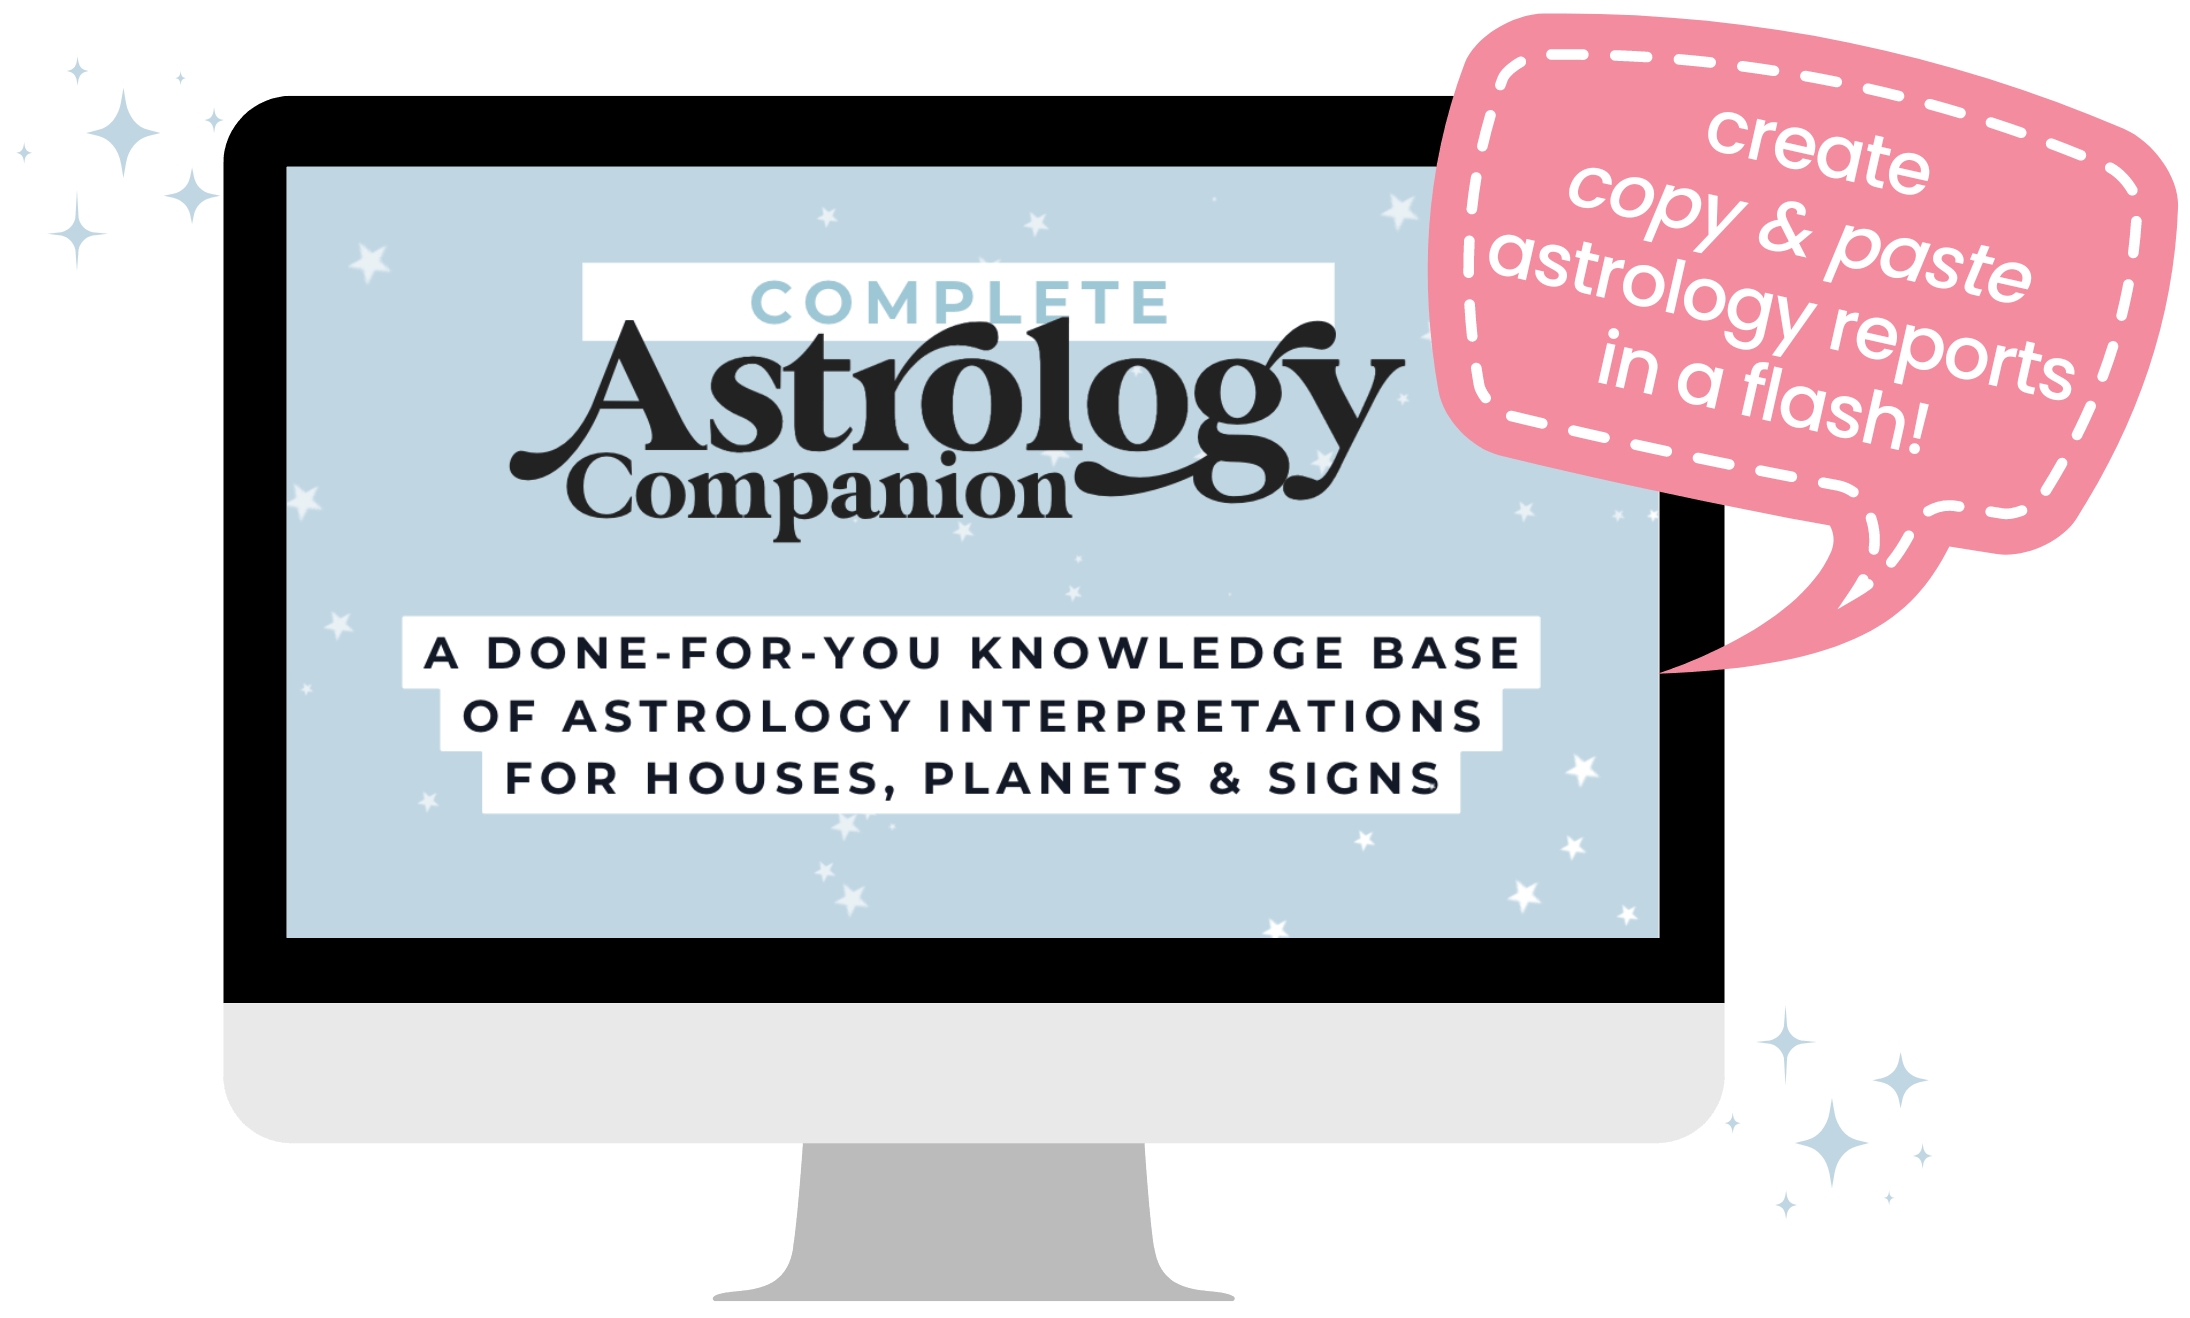 Complete Astrology Companion | Cosmic CEO